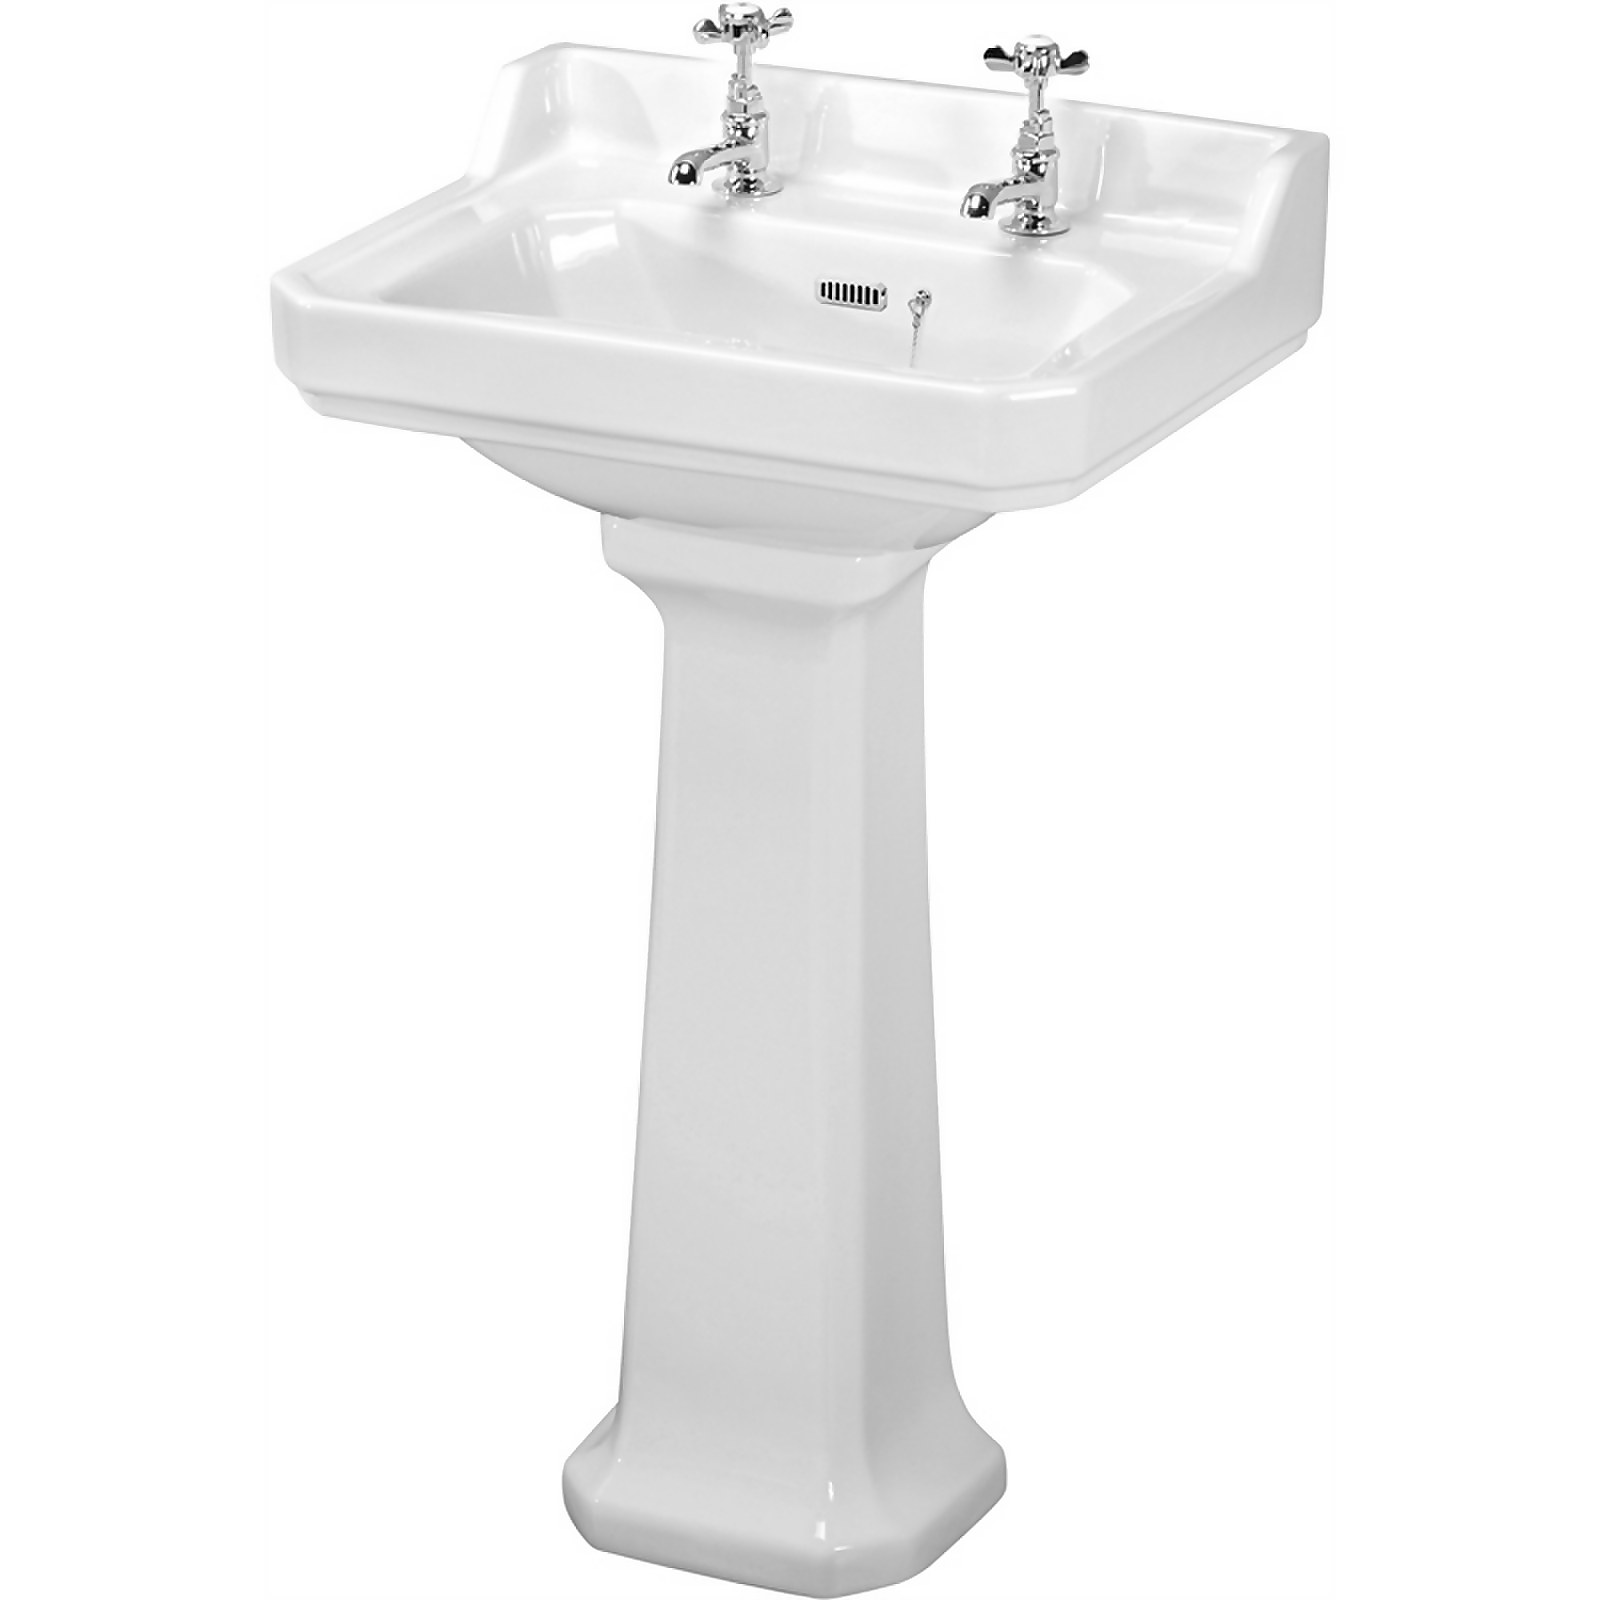 Photo of Balterley Kinston 2 Tap Hole Basin And Full Pedestal - 560mm